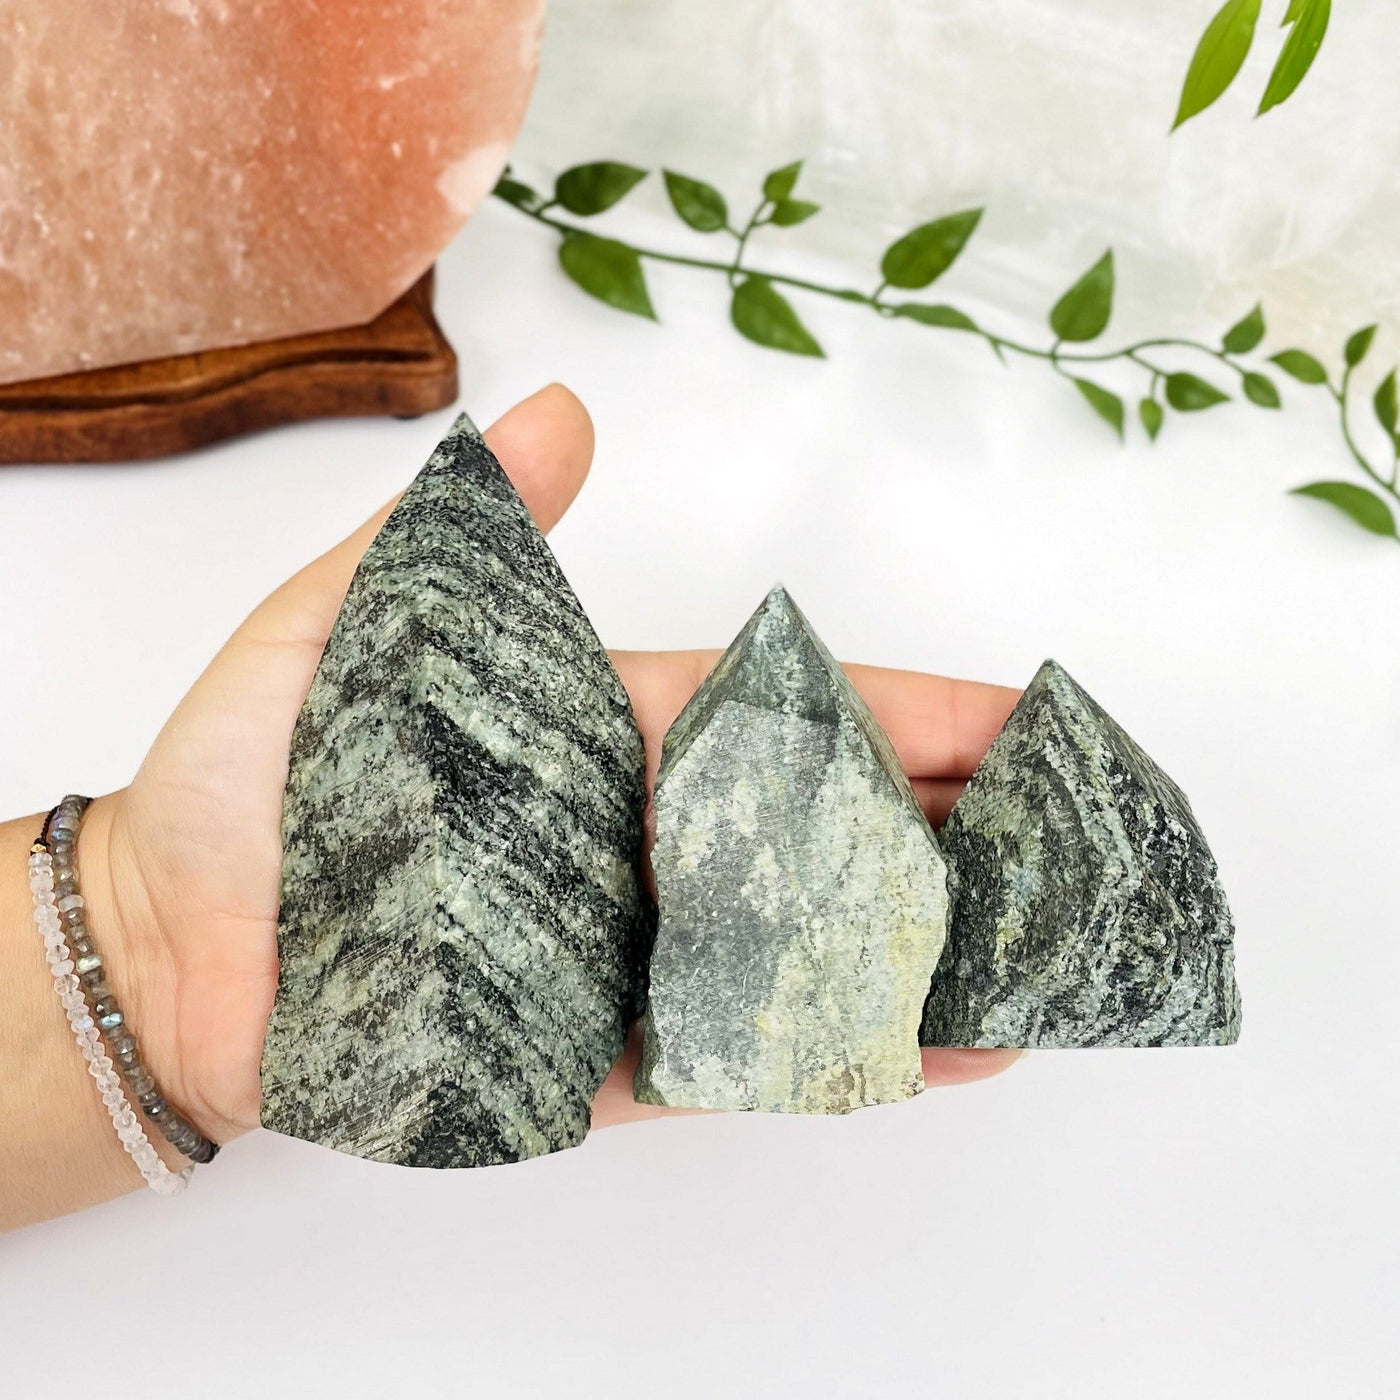 green snakeskin jasper points in hand for size reference